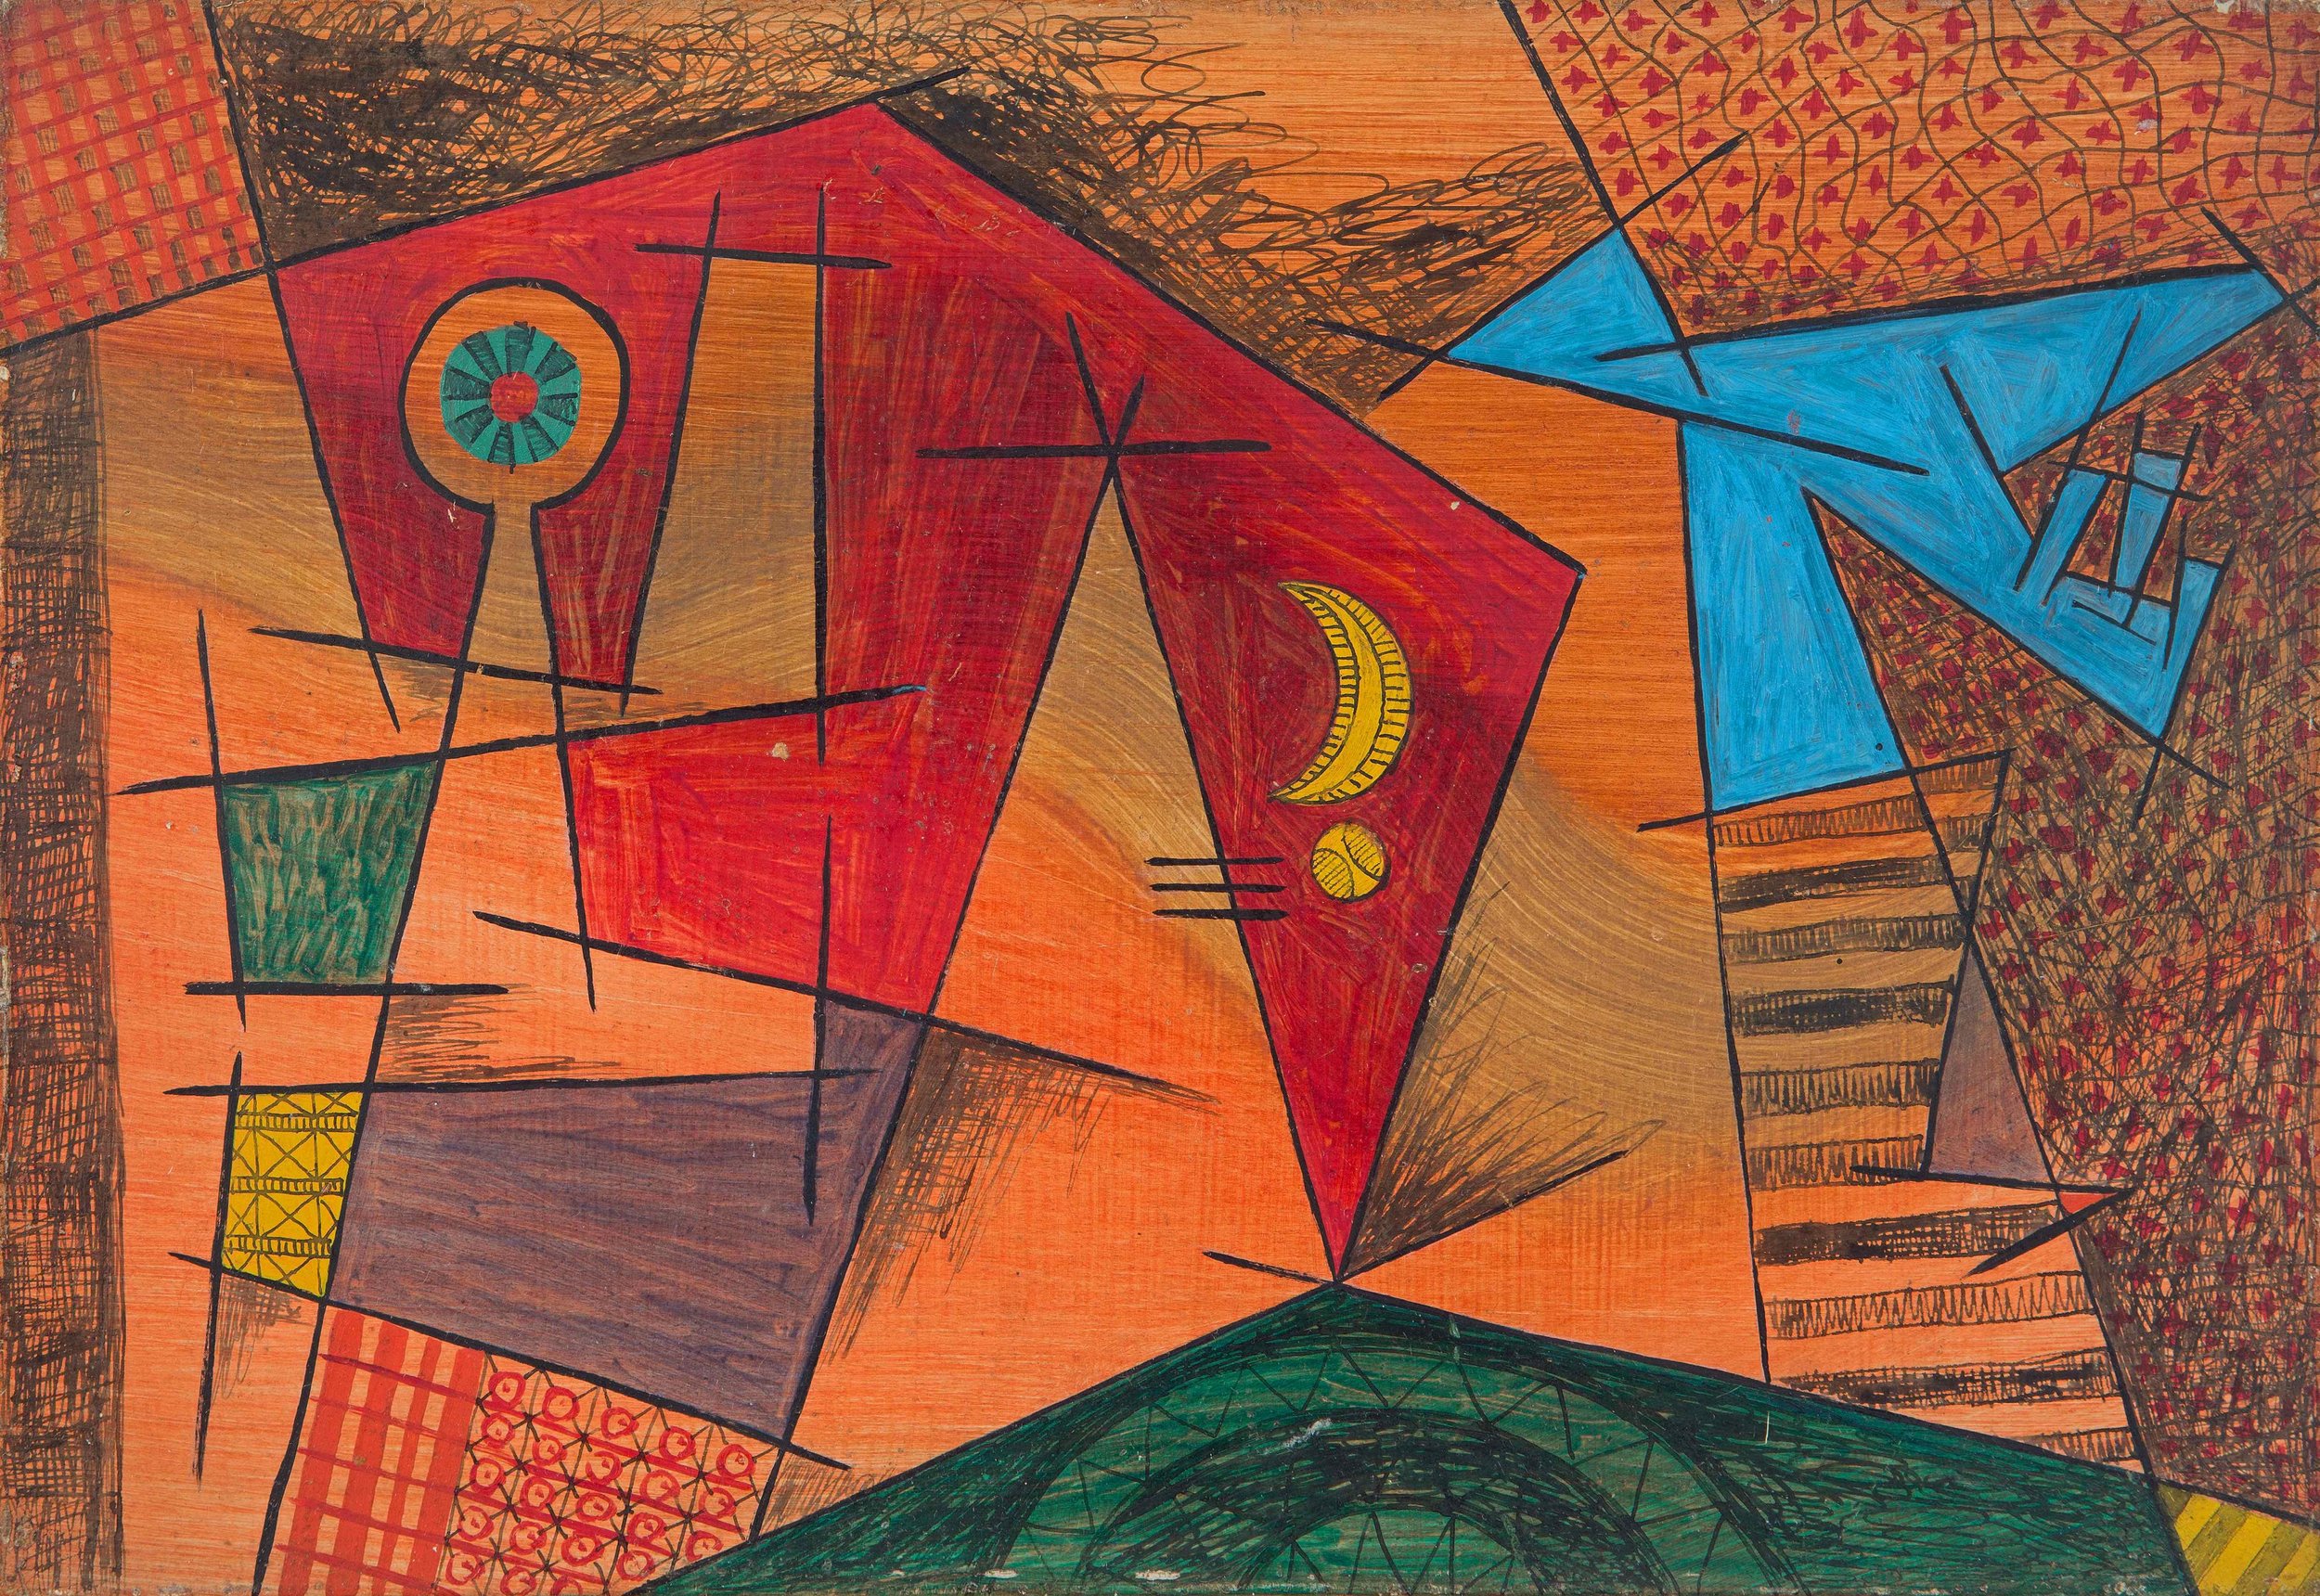 Abstract landscape with patterned and solid planes delineated with black lines in orange, red, green and blue.